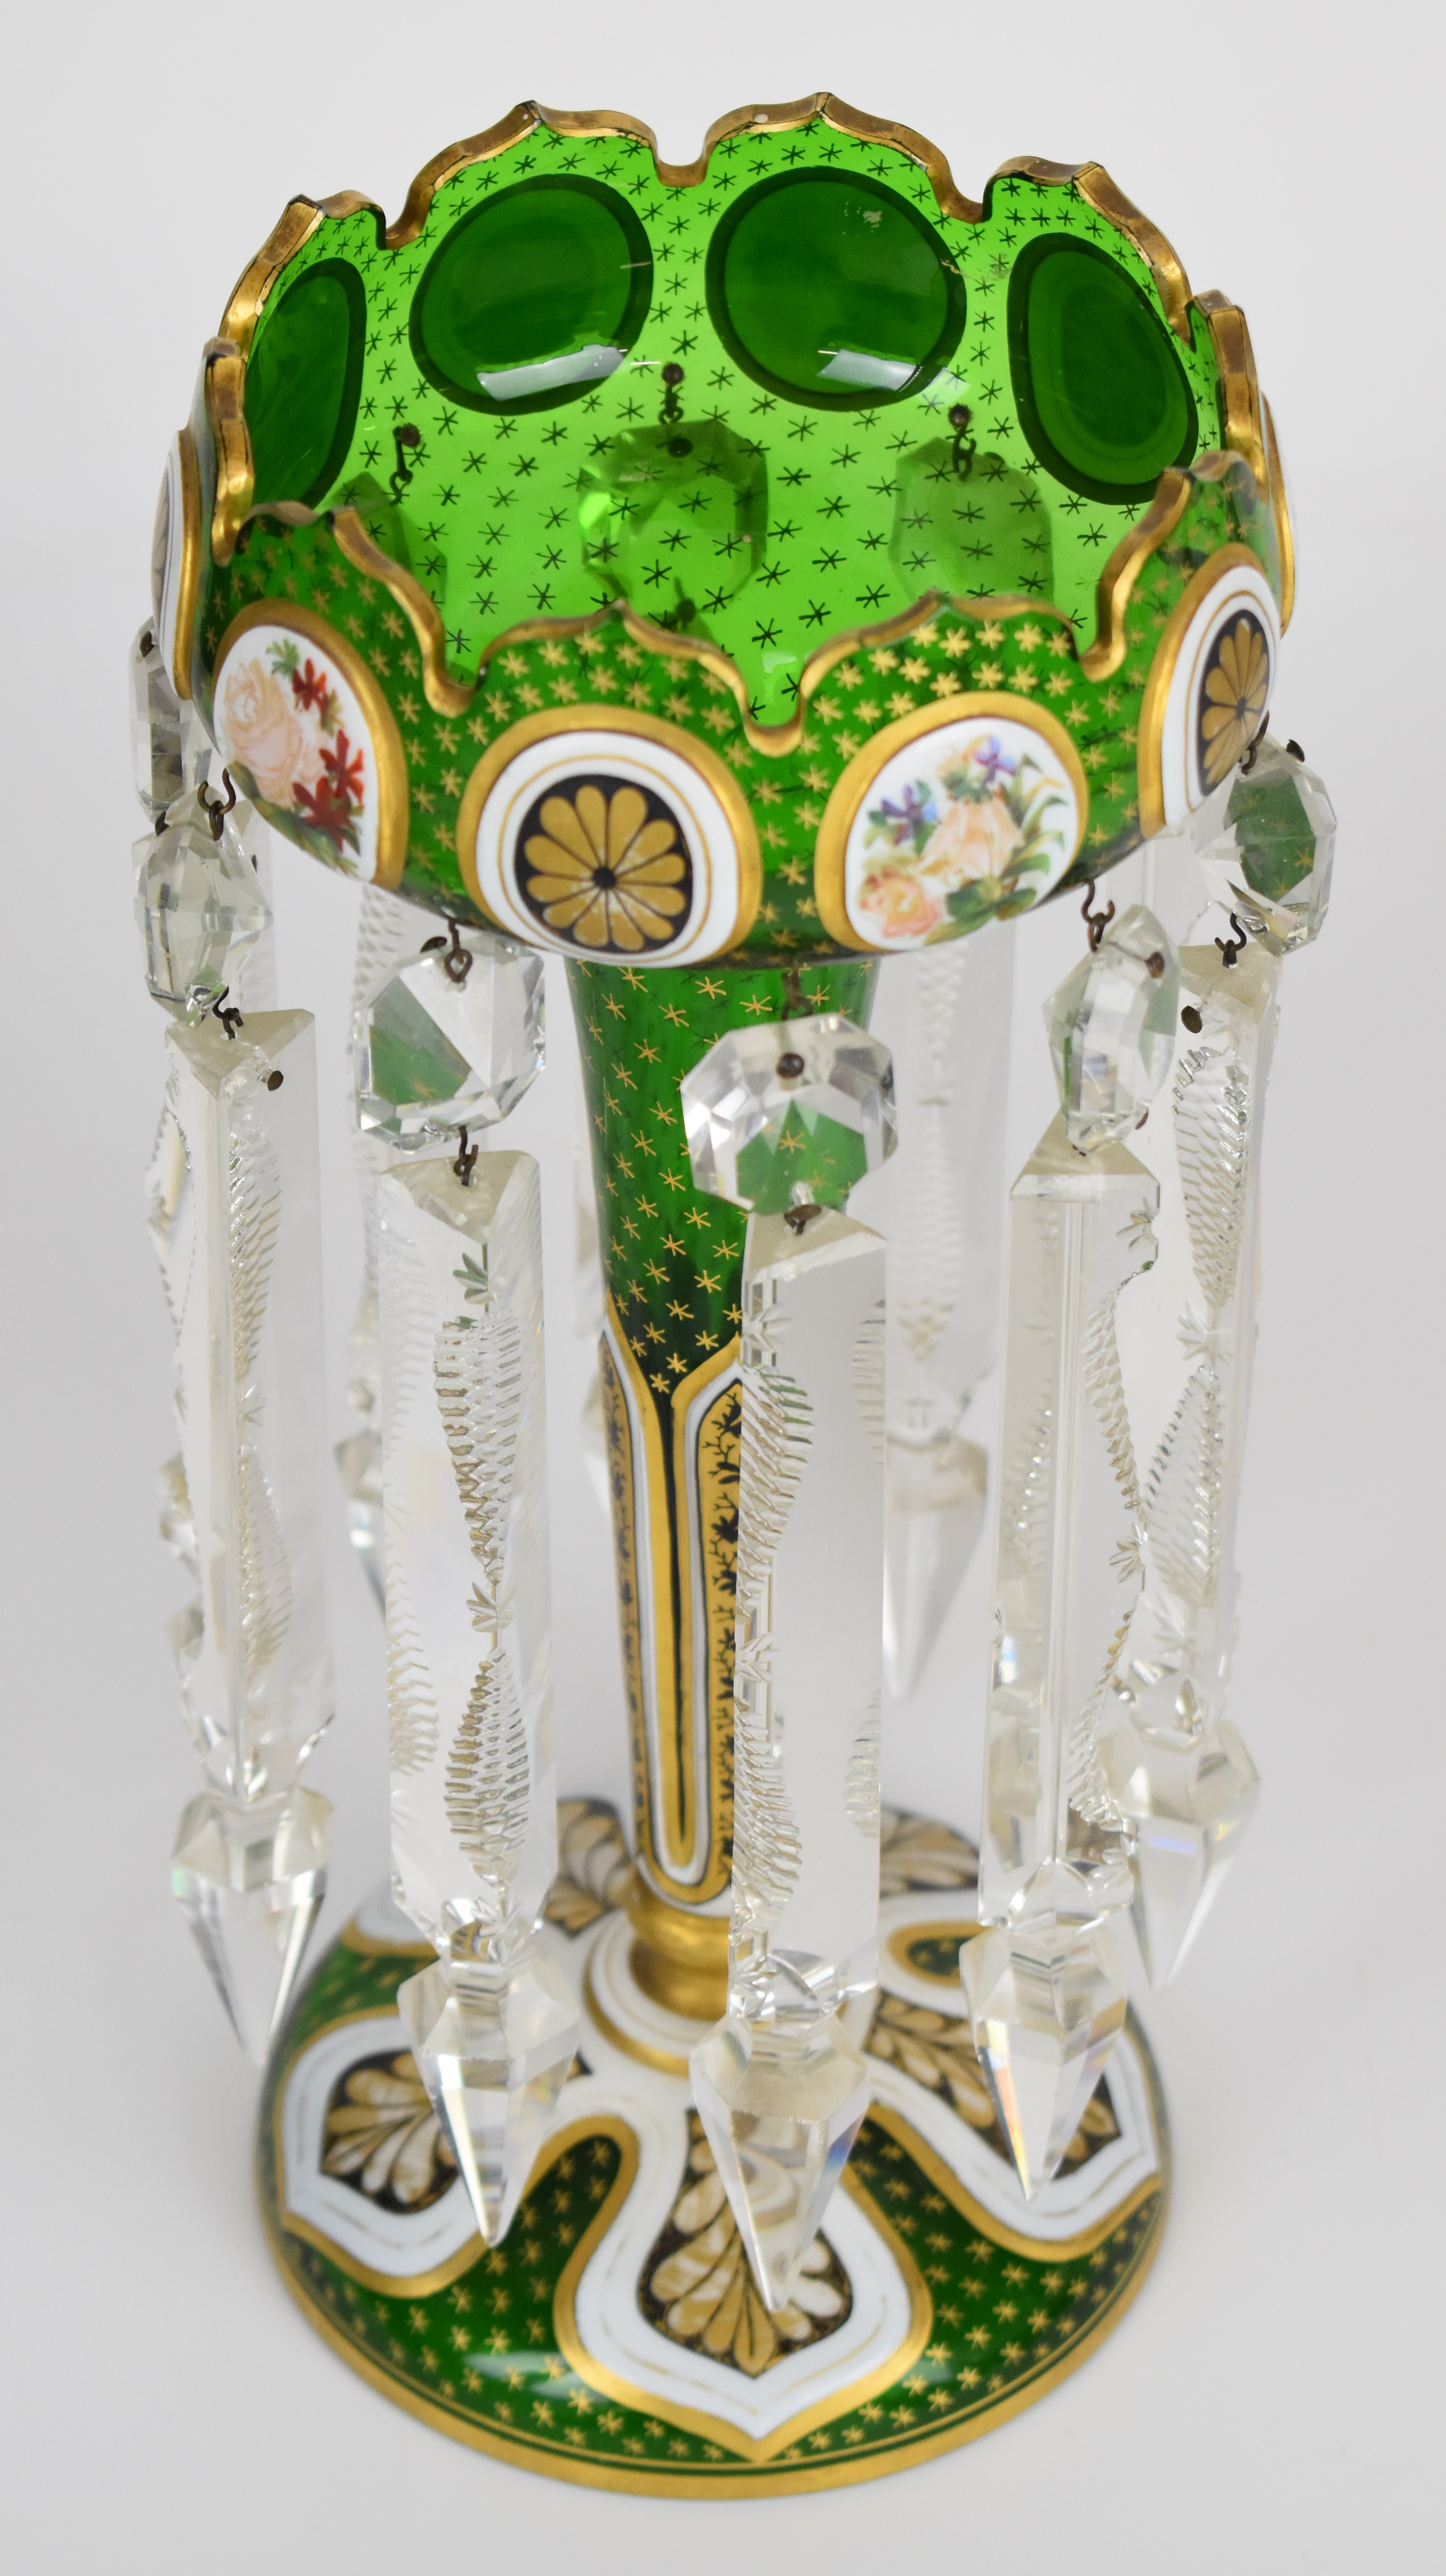 Victorian overlaid glass lustre vase with floral and gilt decoration over a green ground and clear - Image 2 of 6